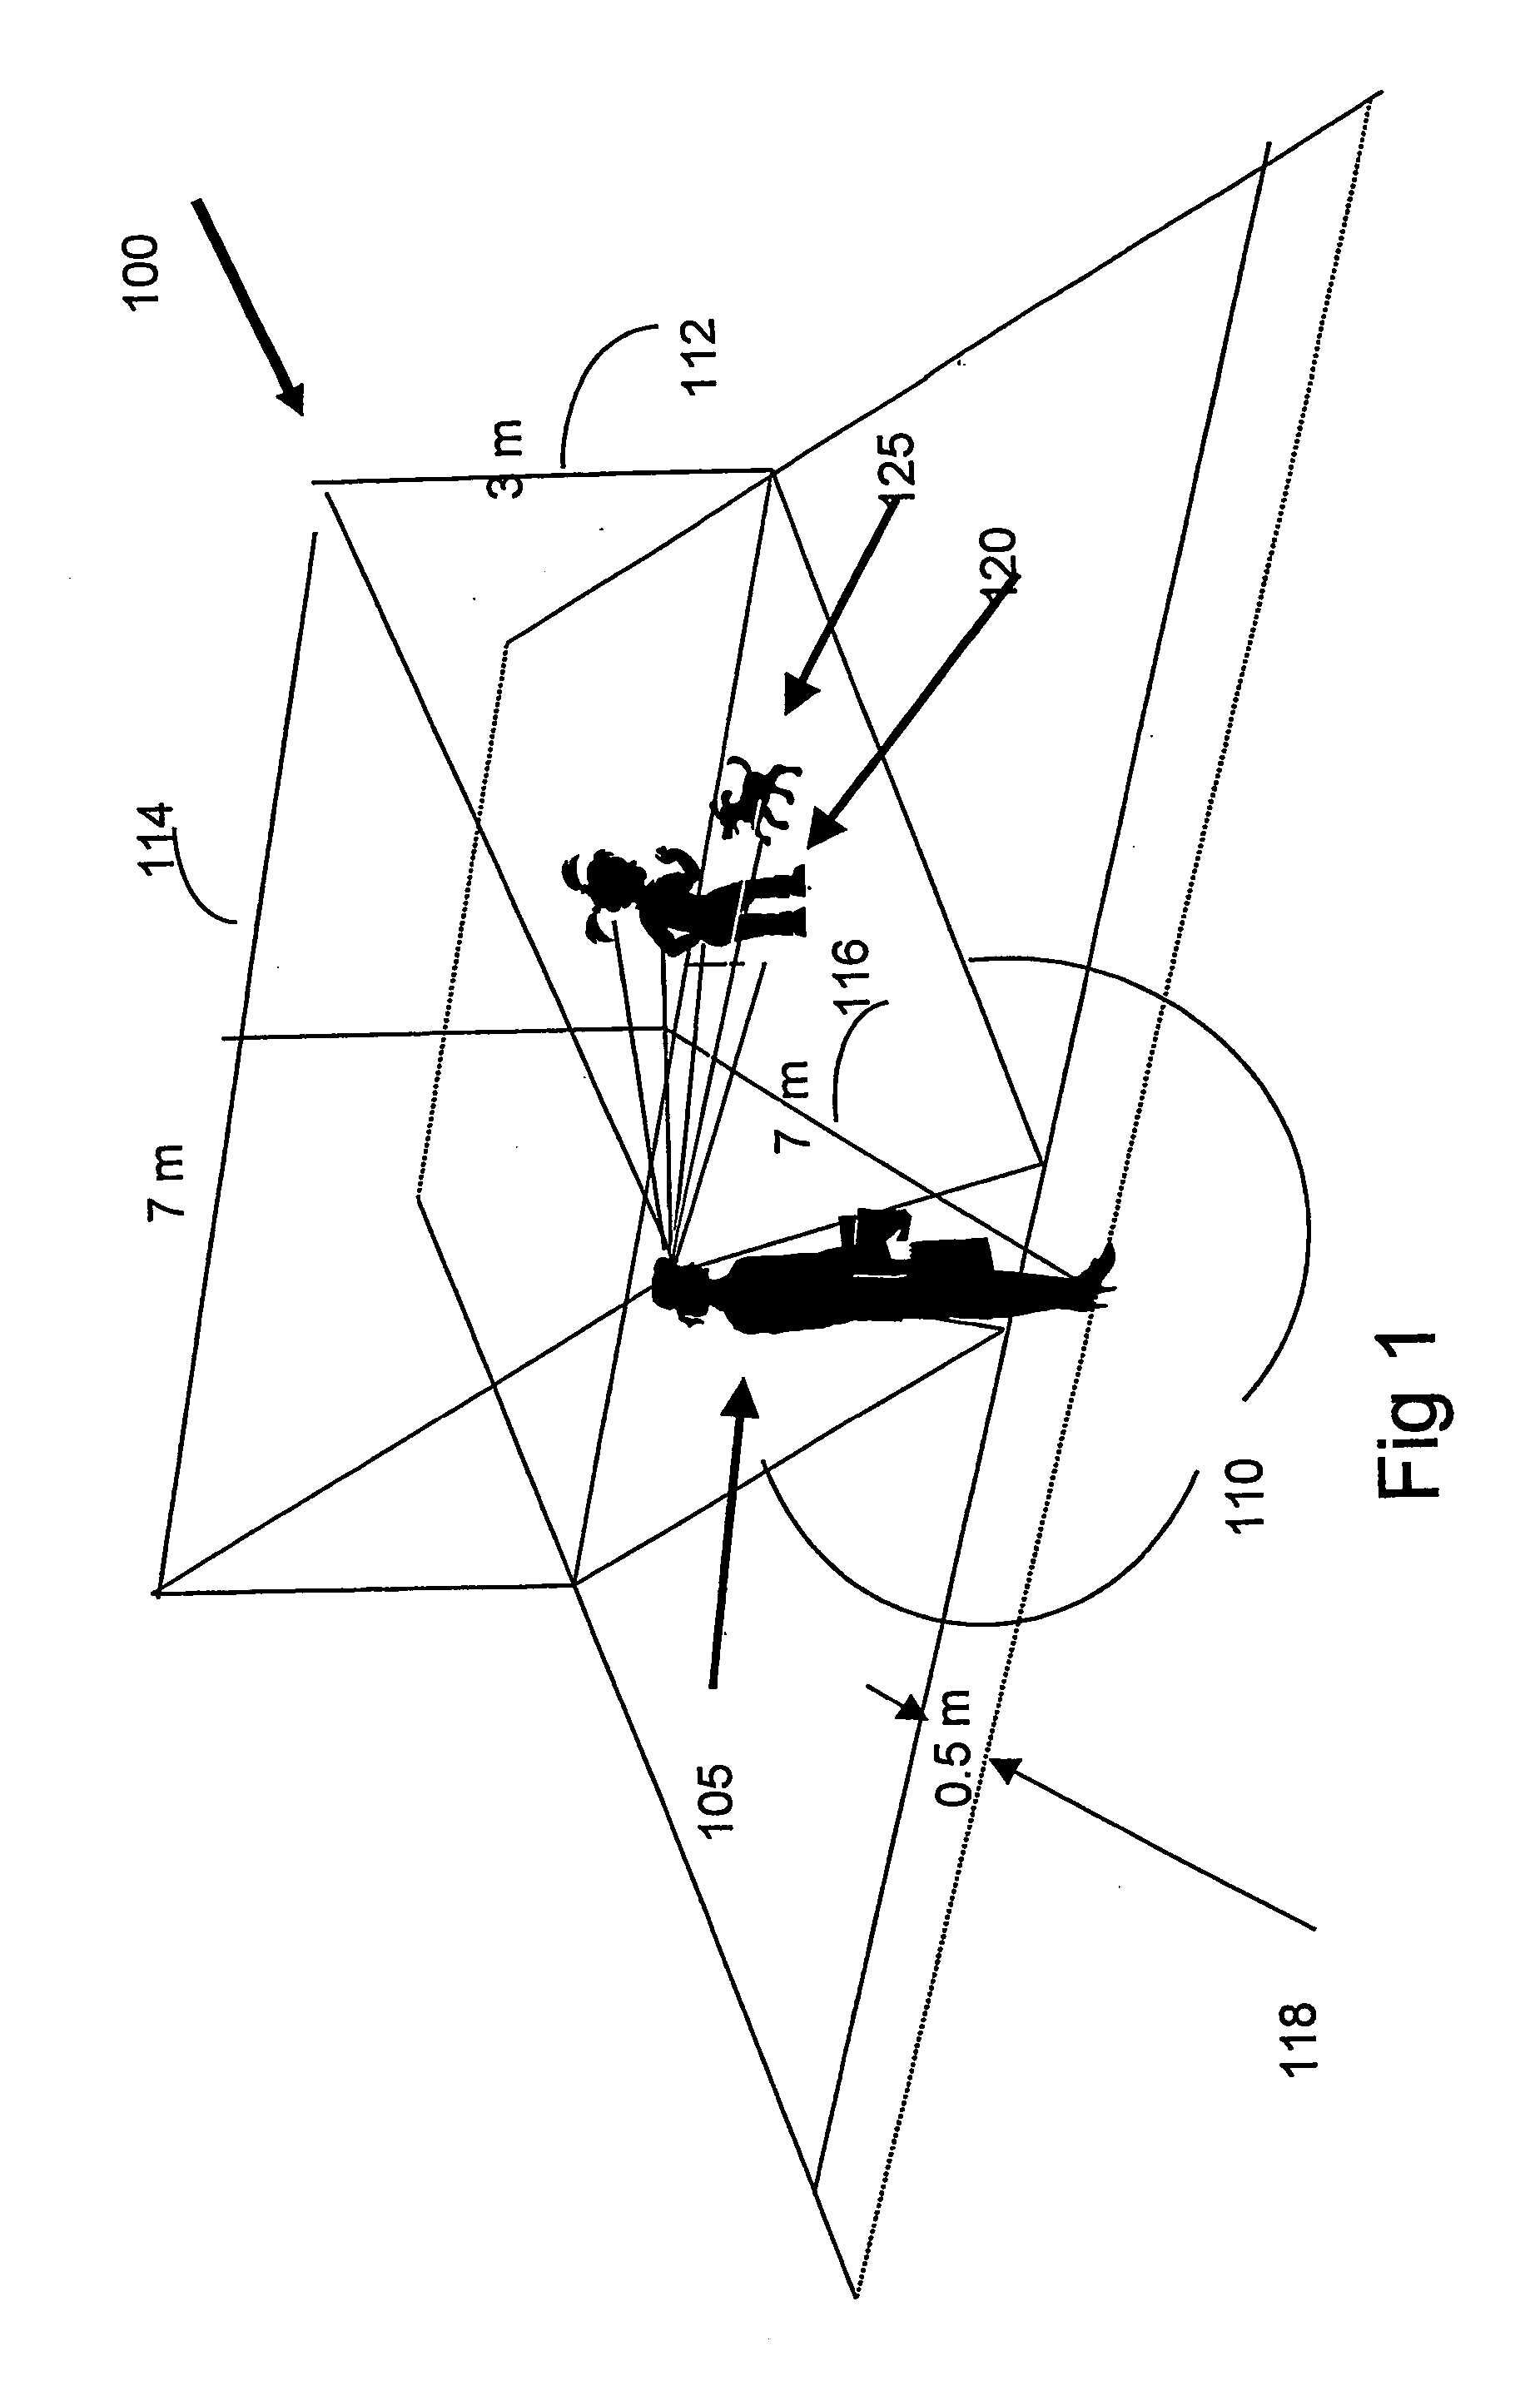 Method and apparatus for a multisensor imaging and scene interpretation system to aid the visually impaired